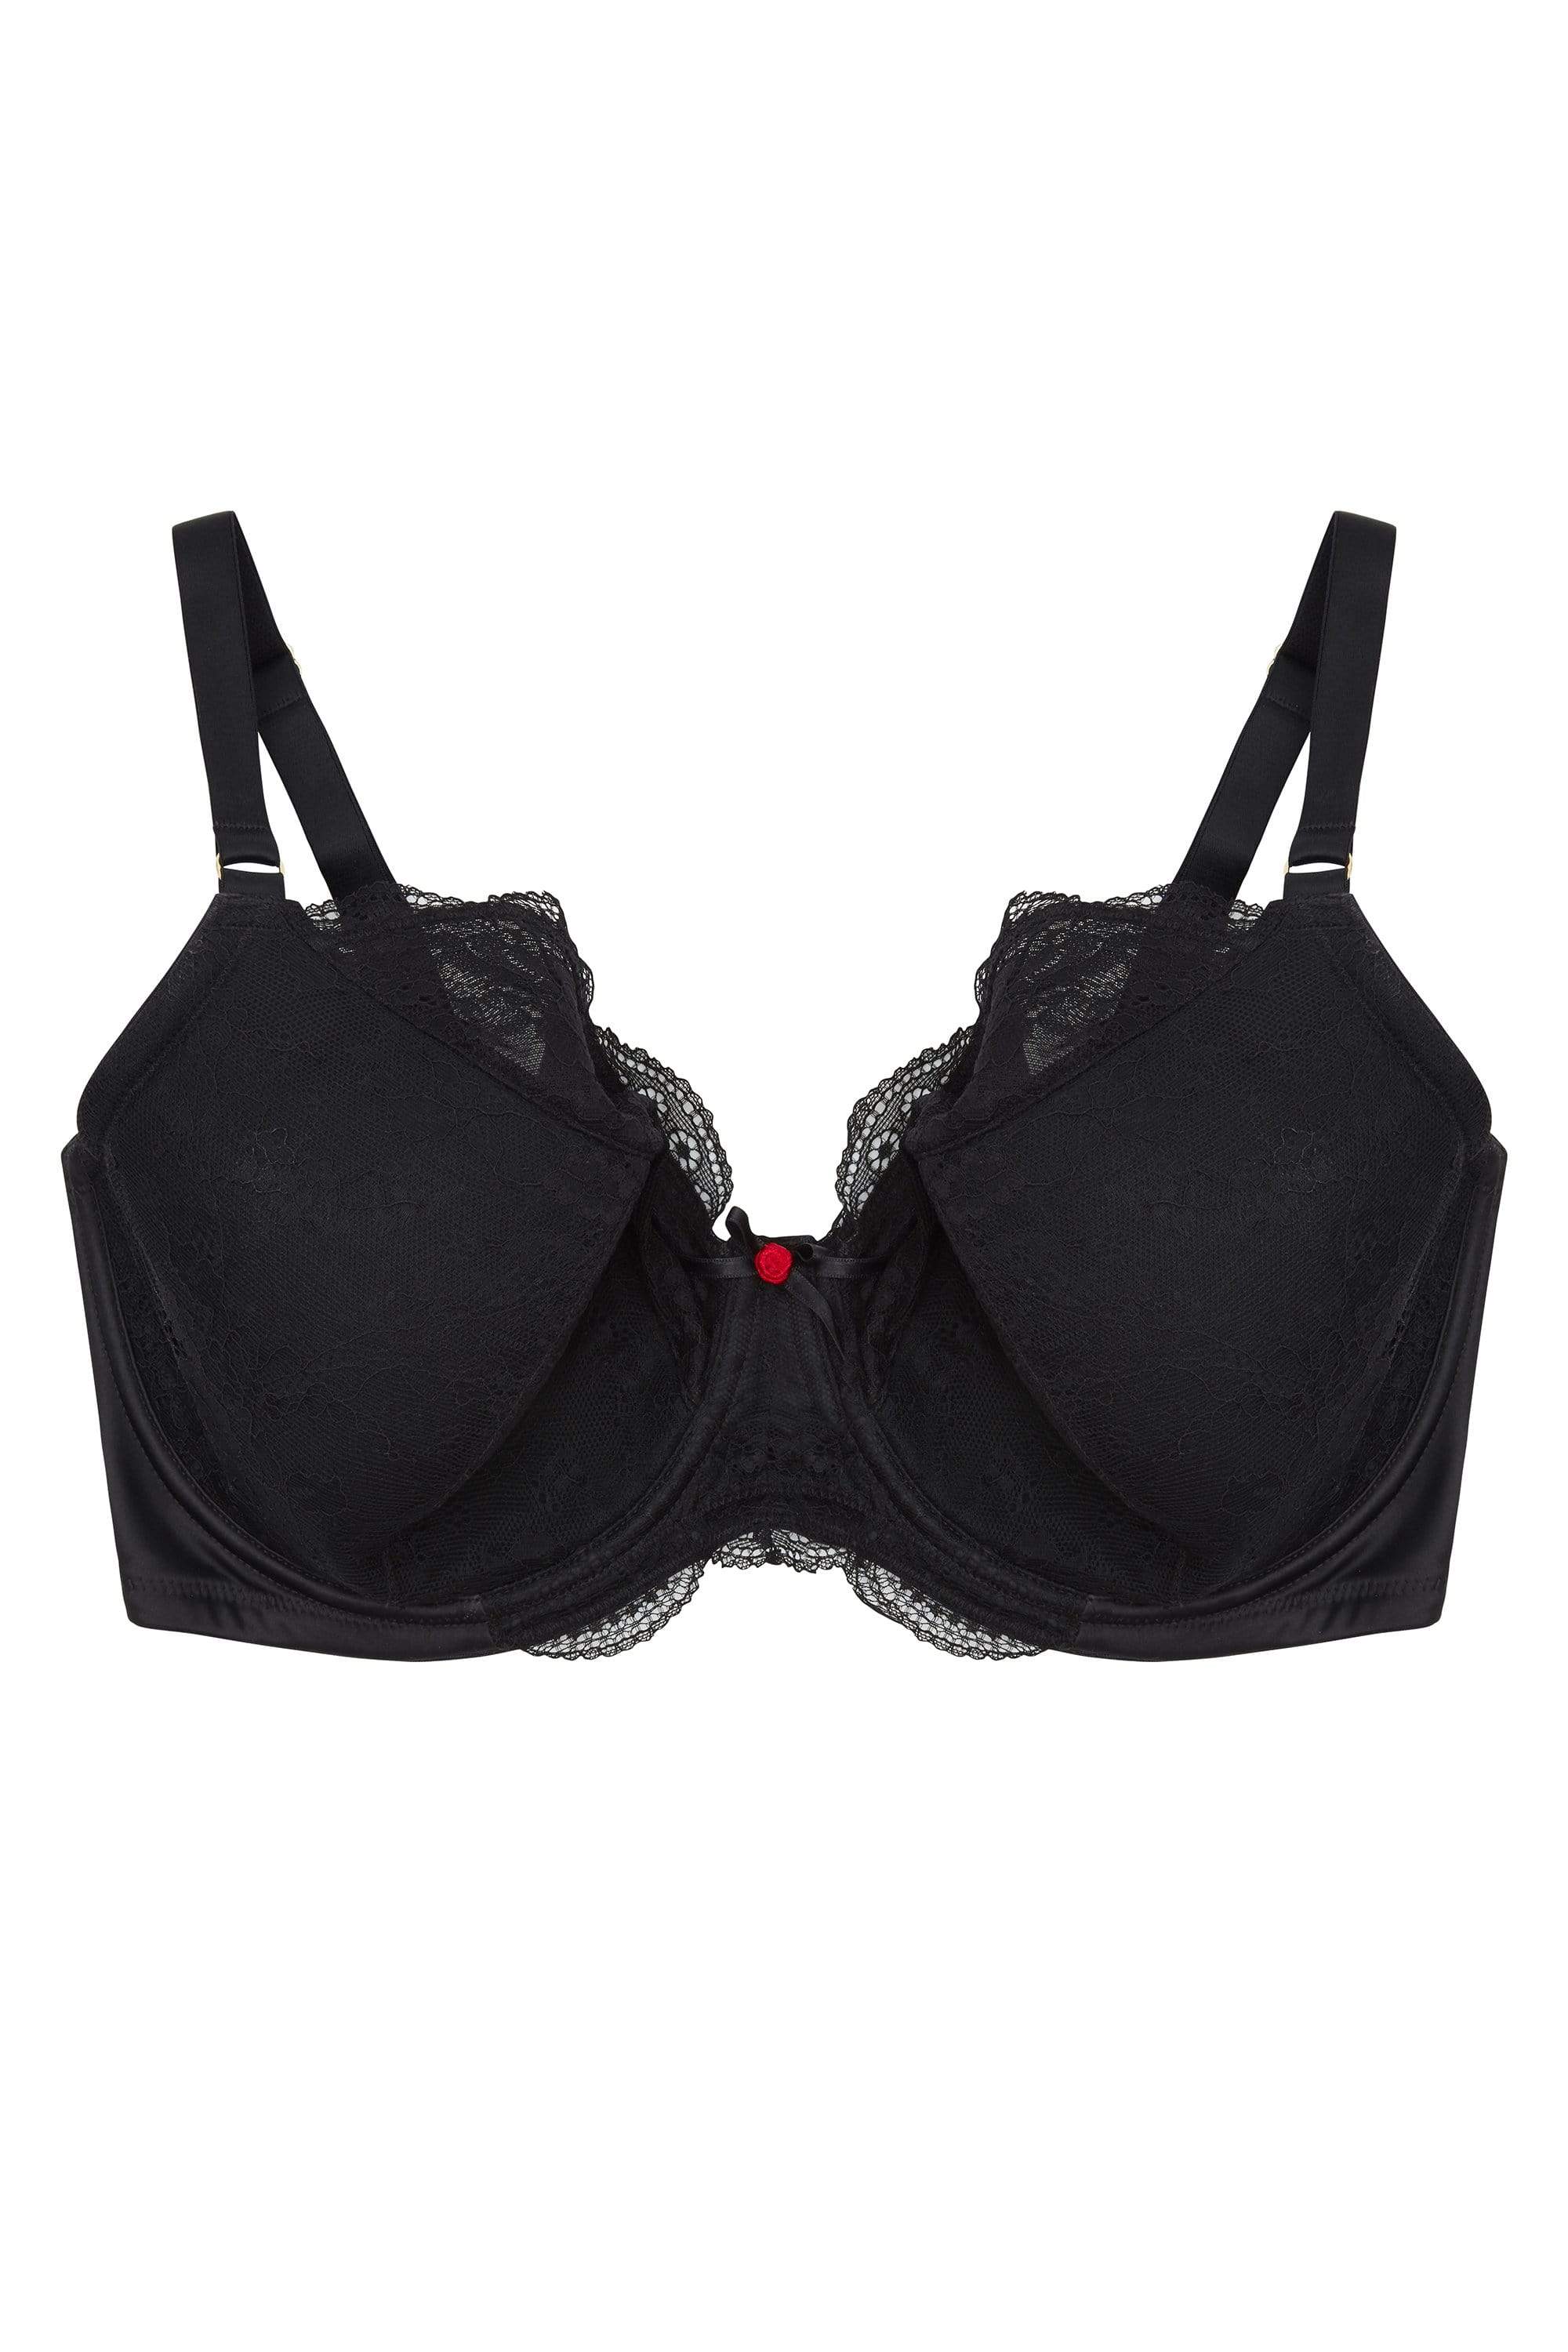 Fion Full Bust Black Satin and Lace Bra DD - H